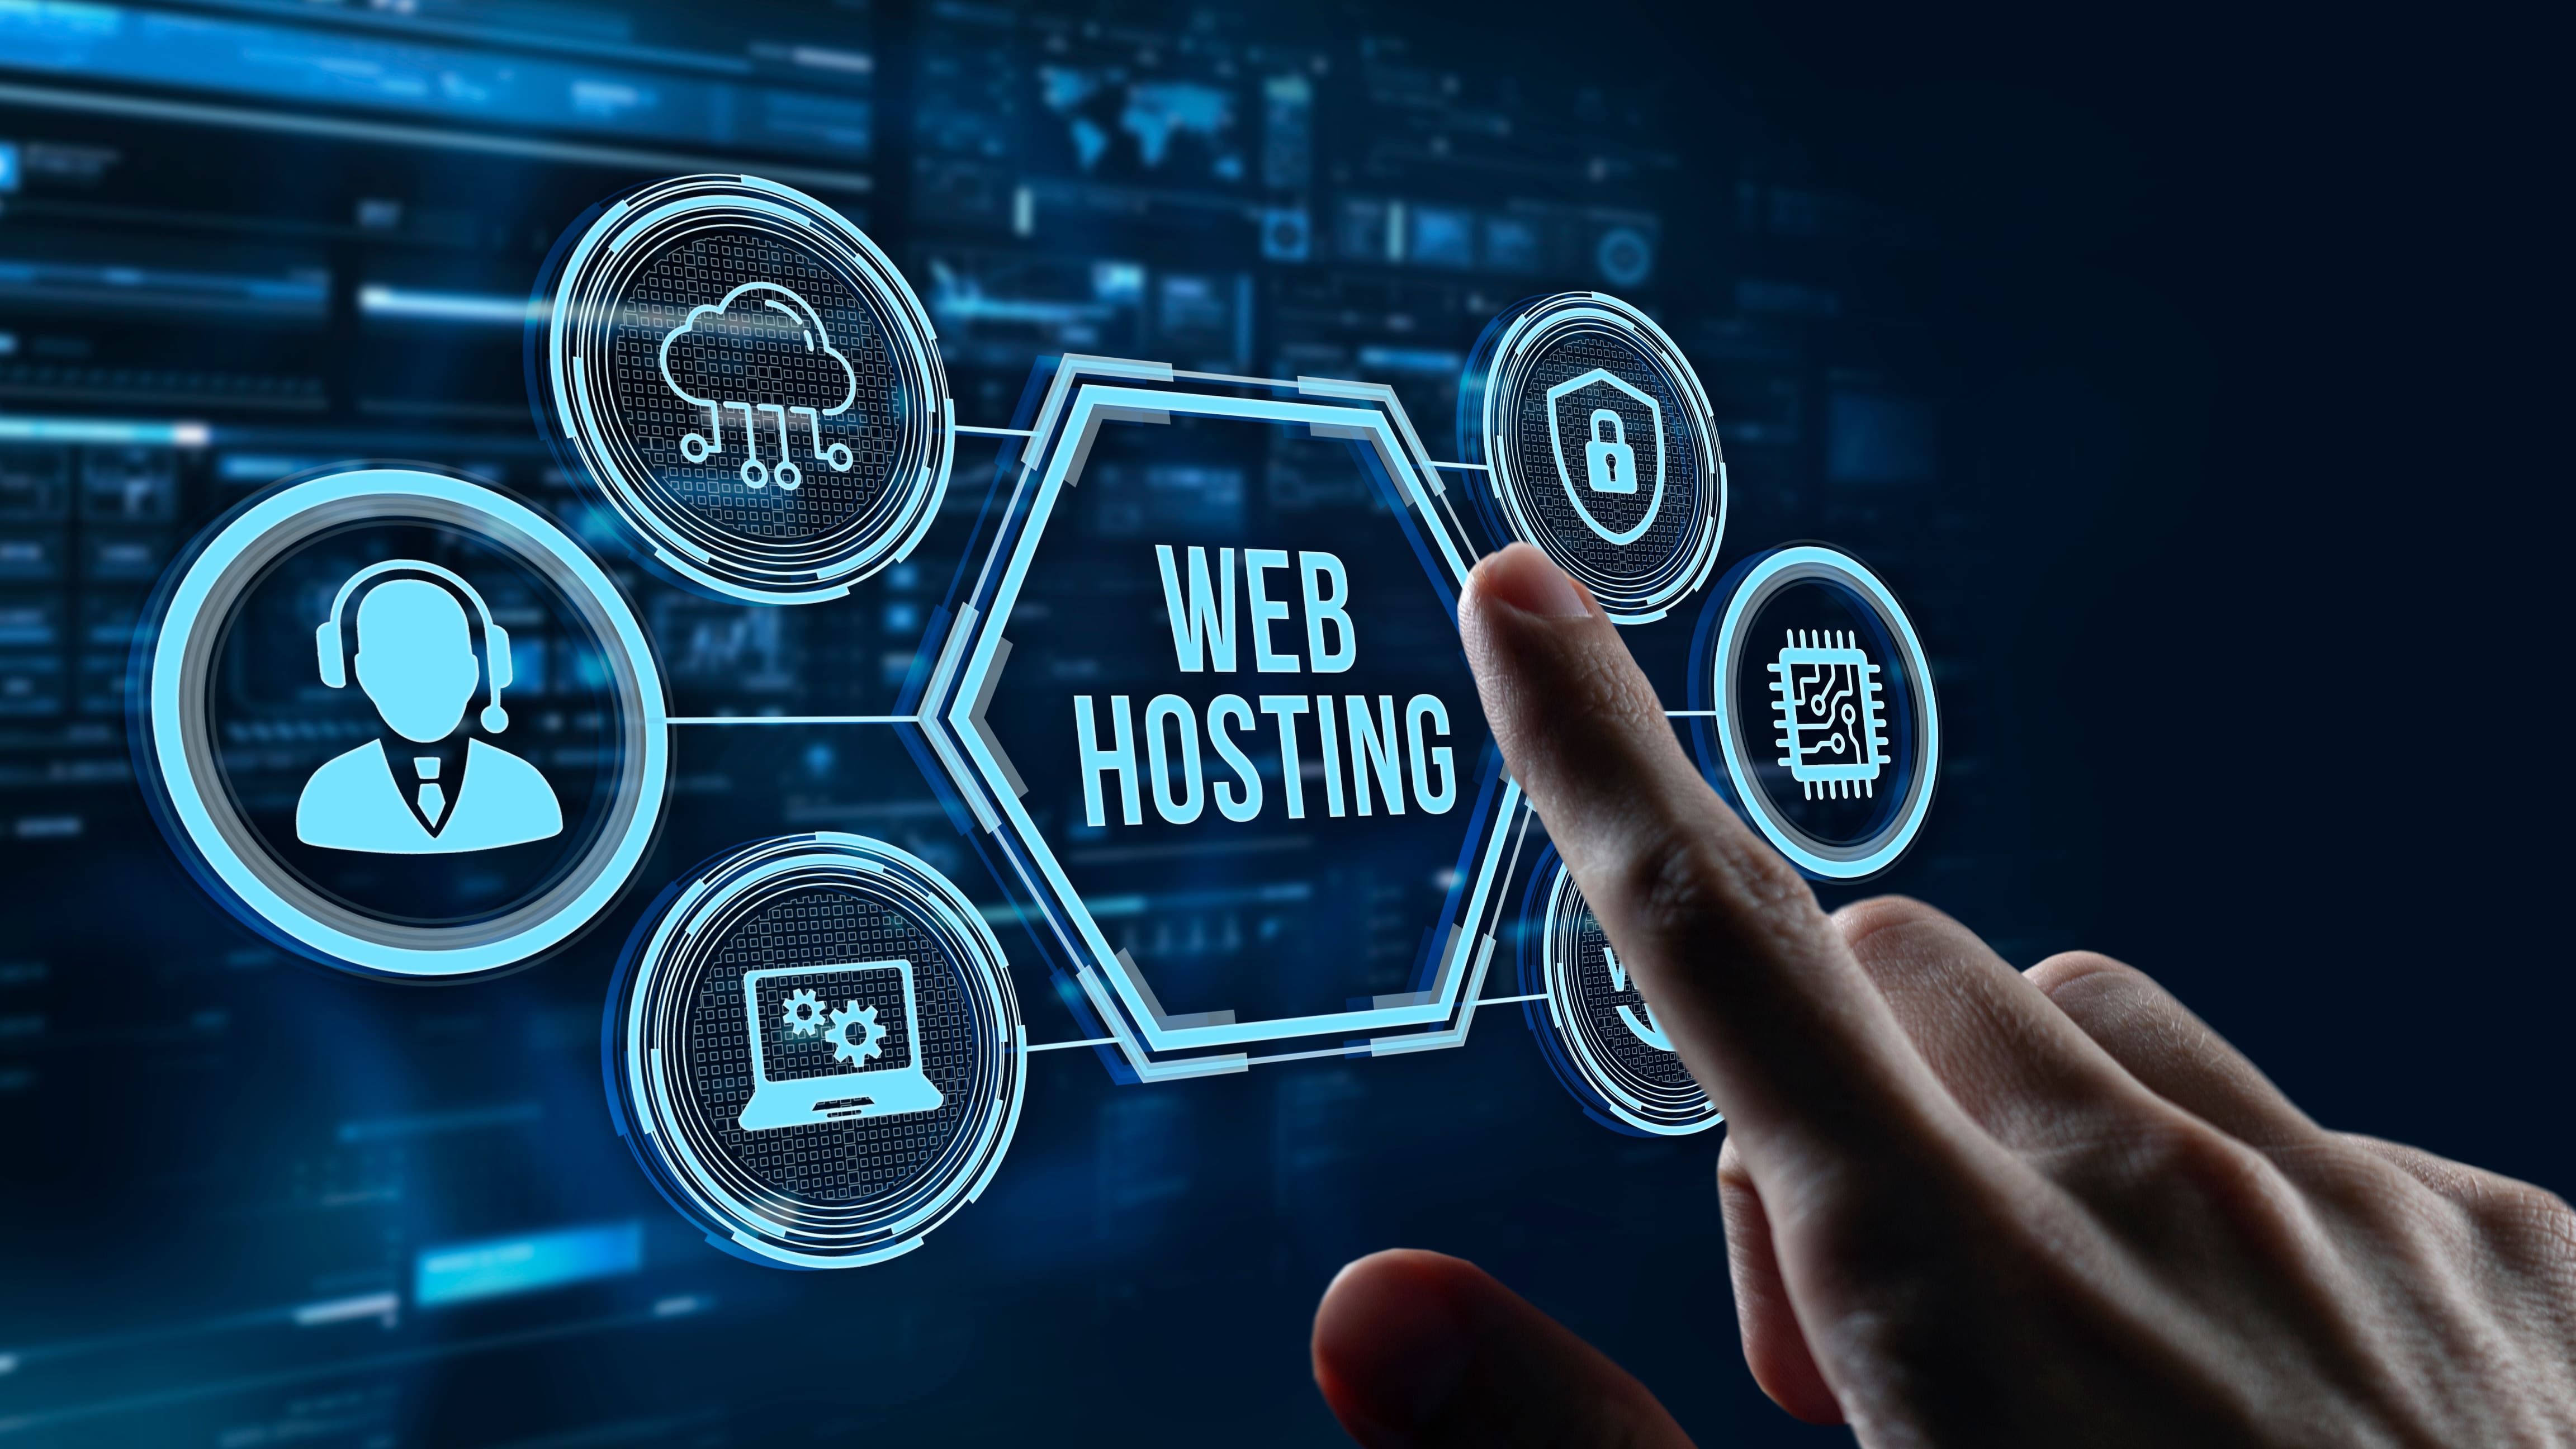 Internet, business, technology and networking concept.web hosting